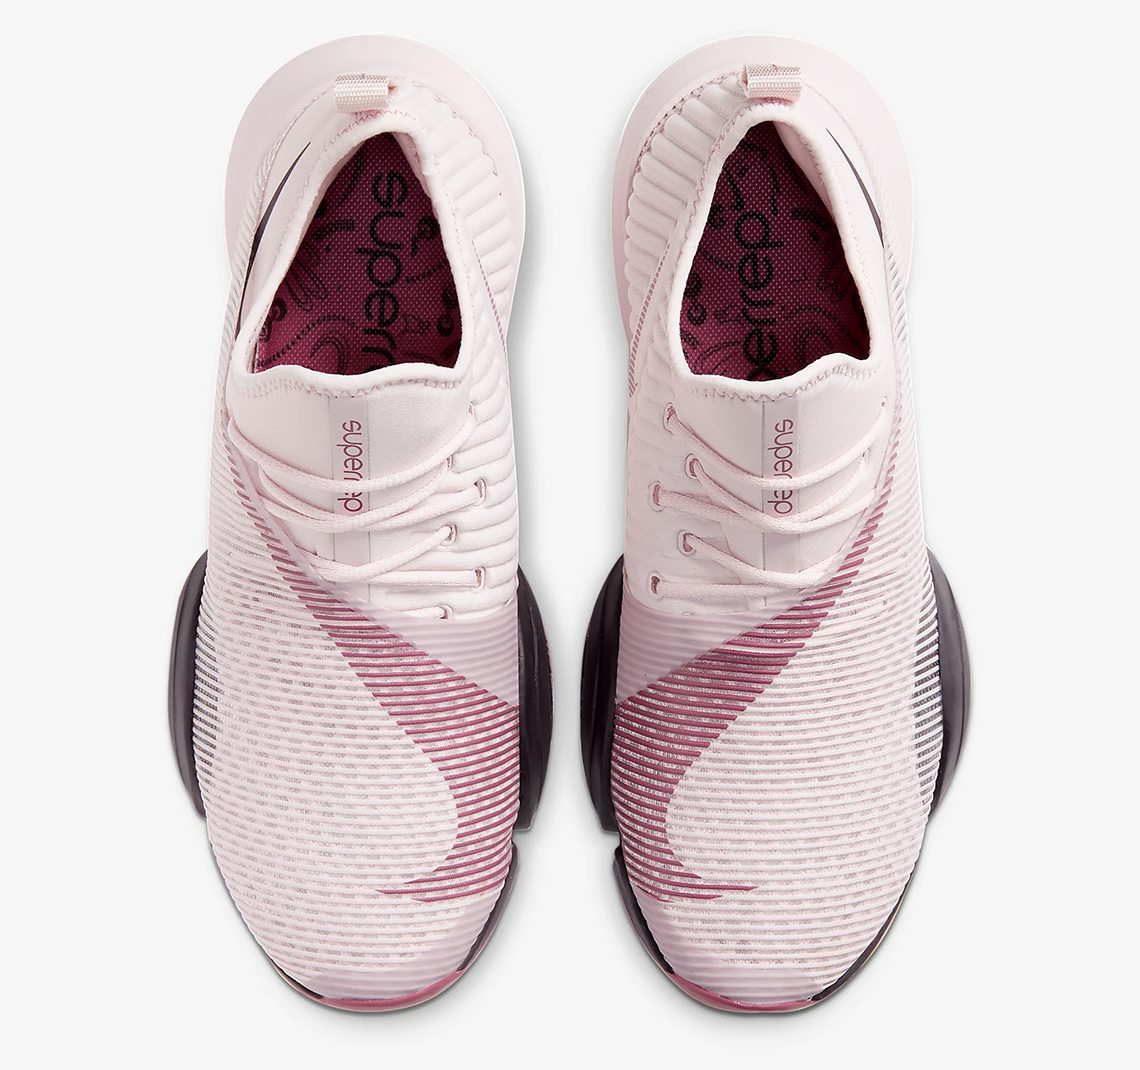 Nike SuperRep HIIT Shoes For Women Release Date